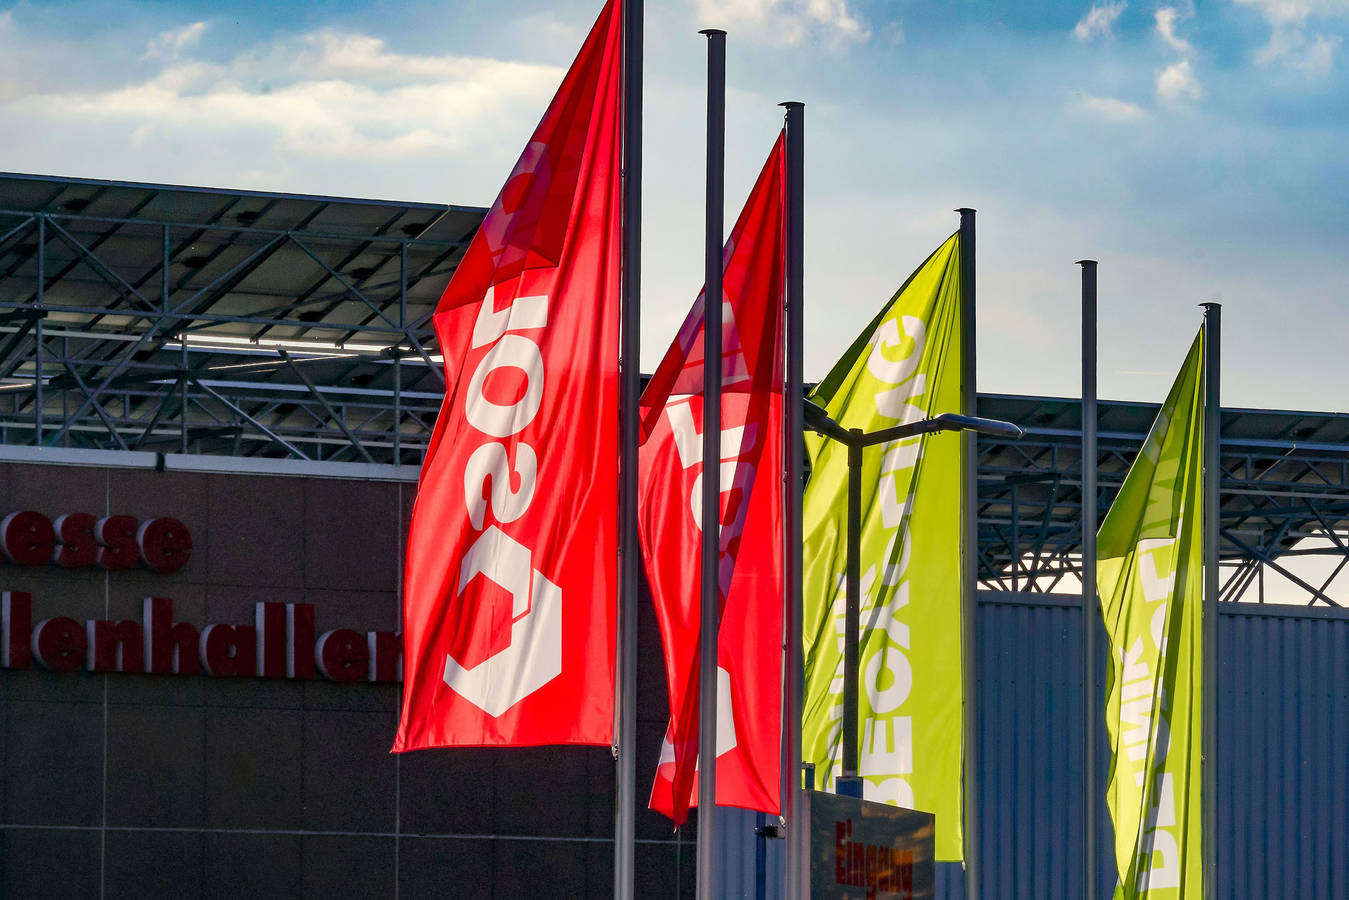 On 1 & 2 April 2020, the trade shows Solids & Recycling-Technik Dortmund will address the current and future challenges of the industry.